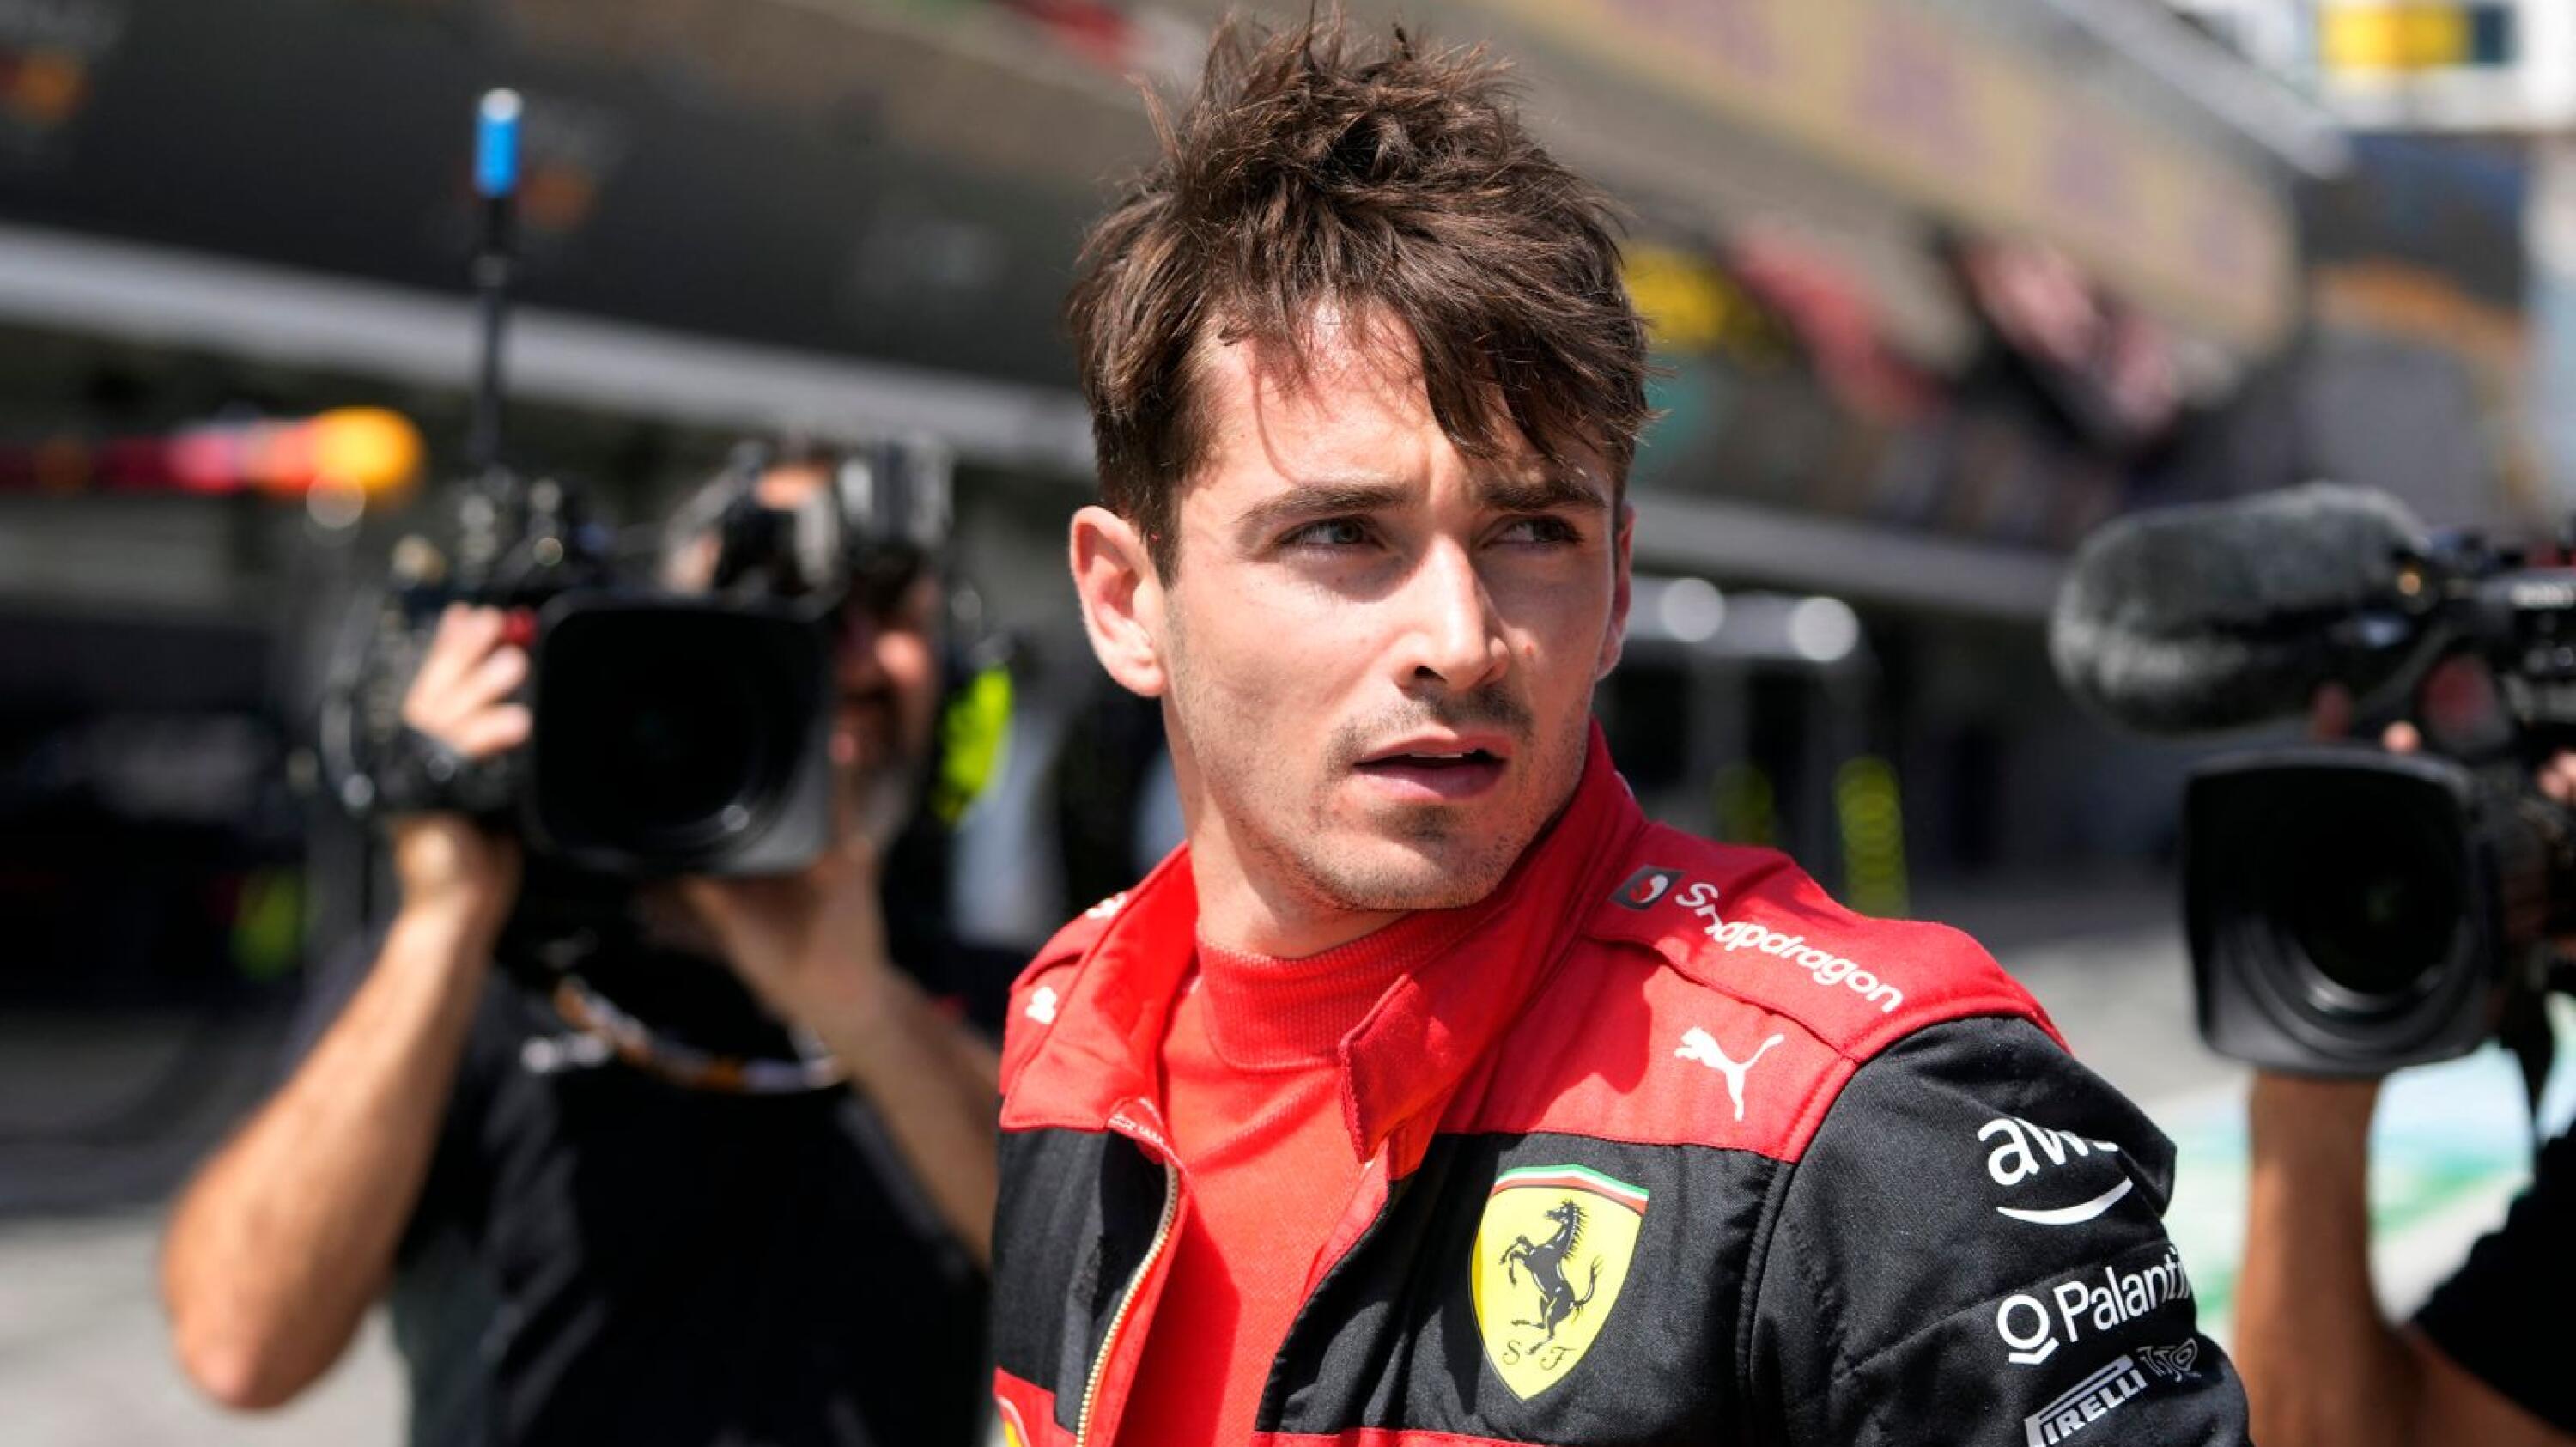 Ferrari's Monegasque driver Charles Leclerc reacts at the pitlane after his car's breakdown during the Spanish Formula One Grand Prix at the Circuit de Catalunya in Montmelo, on the outskirts of Barcelona on Sunday